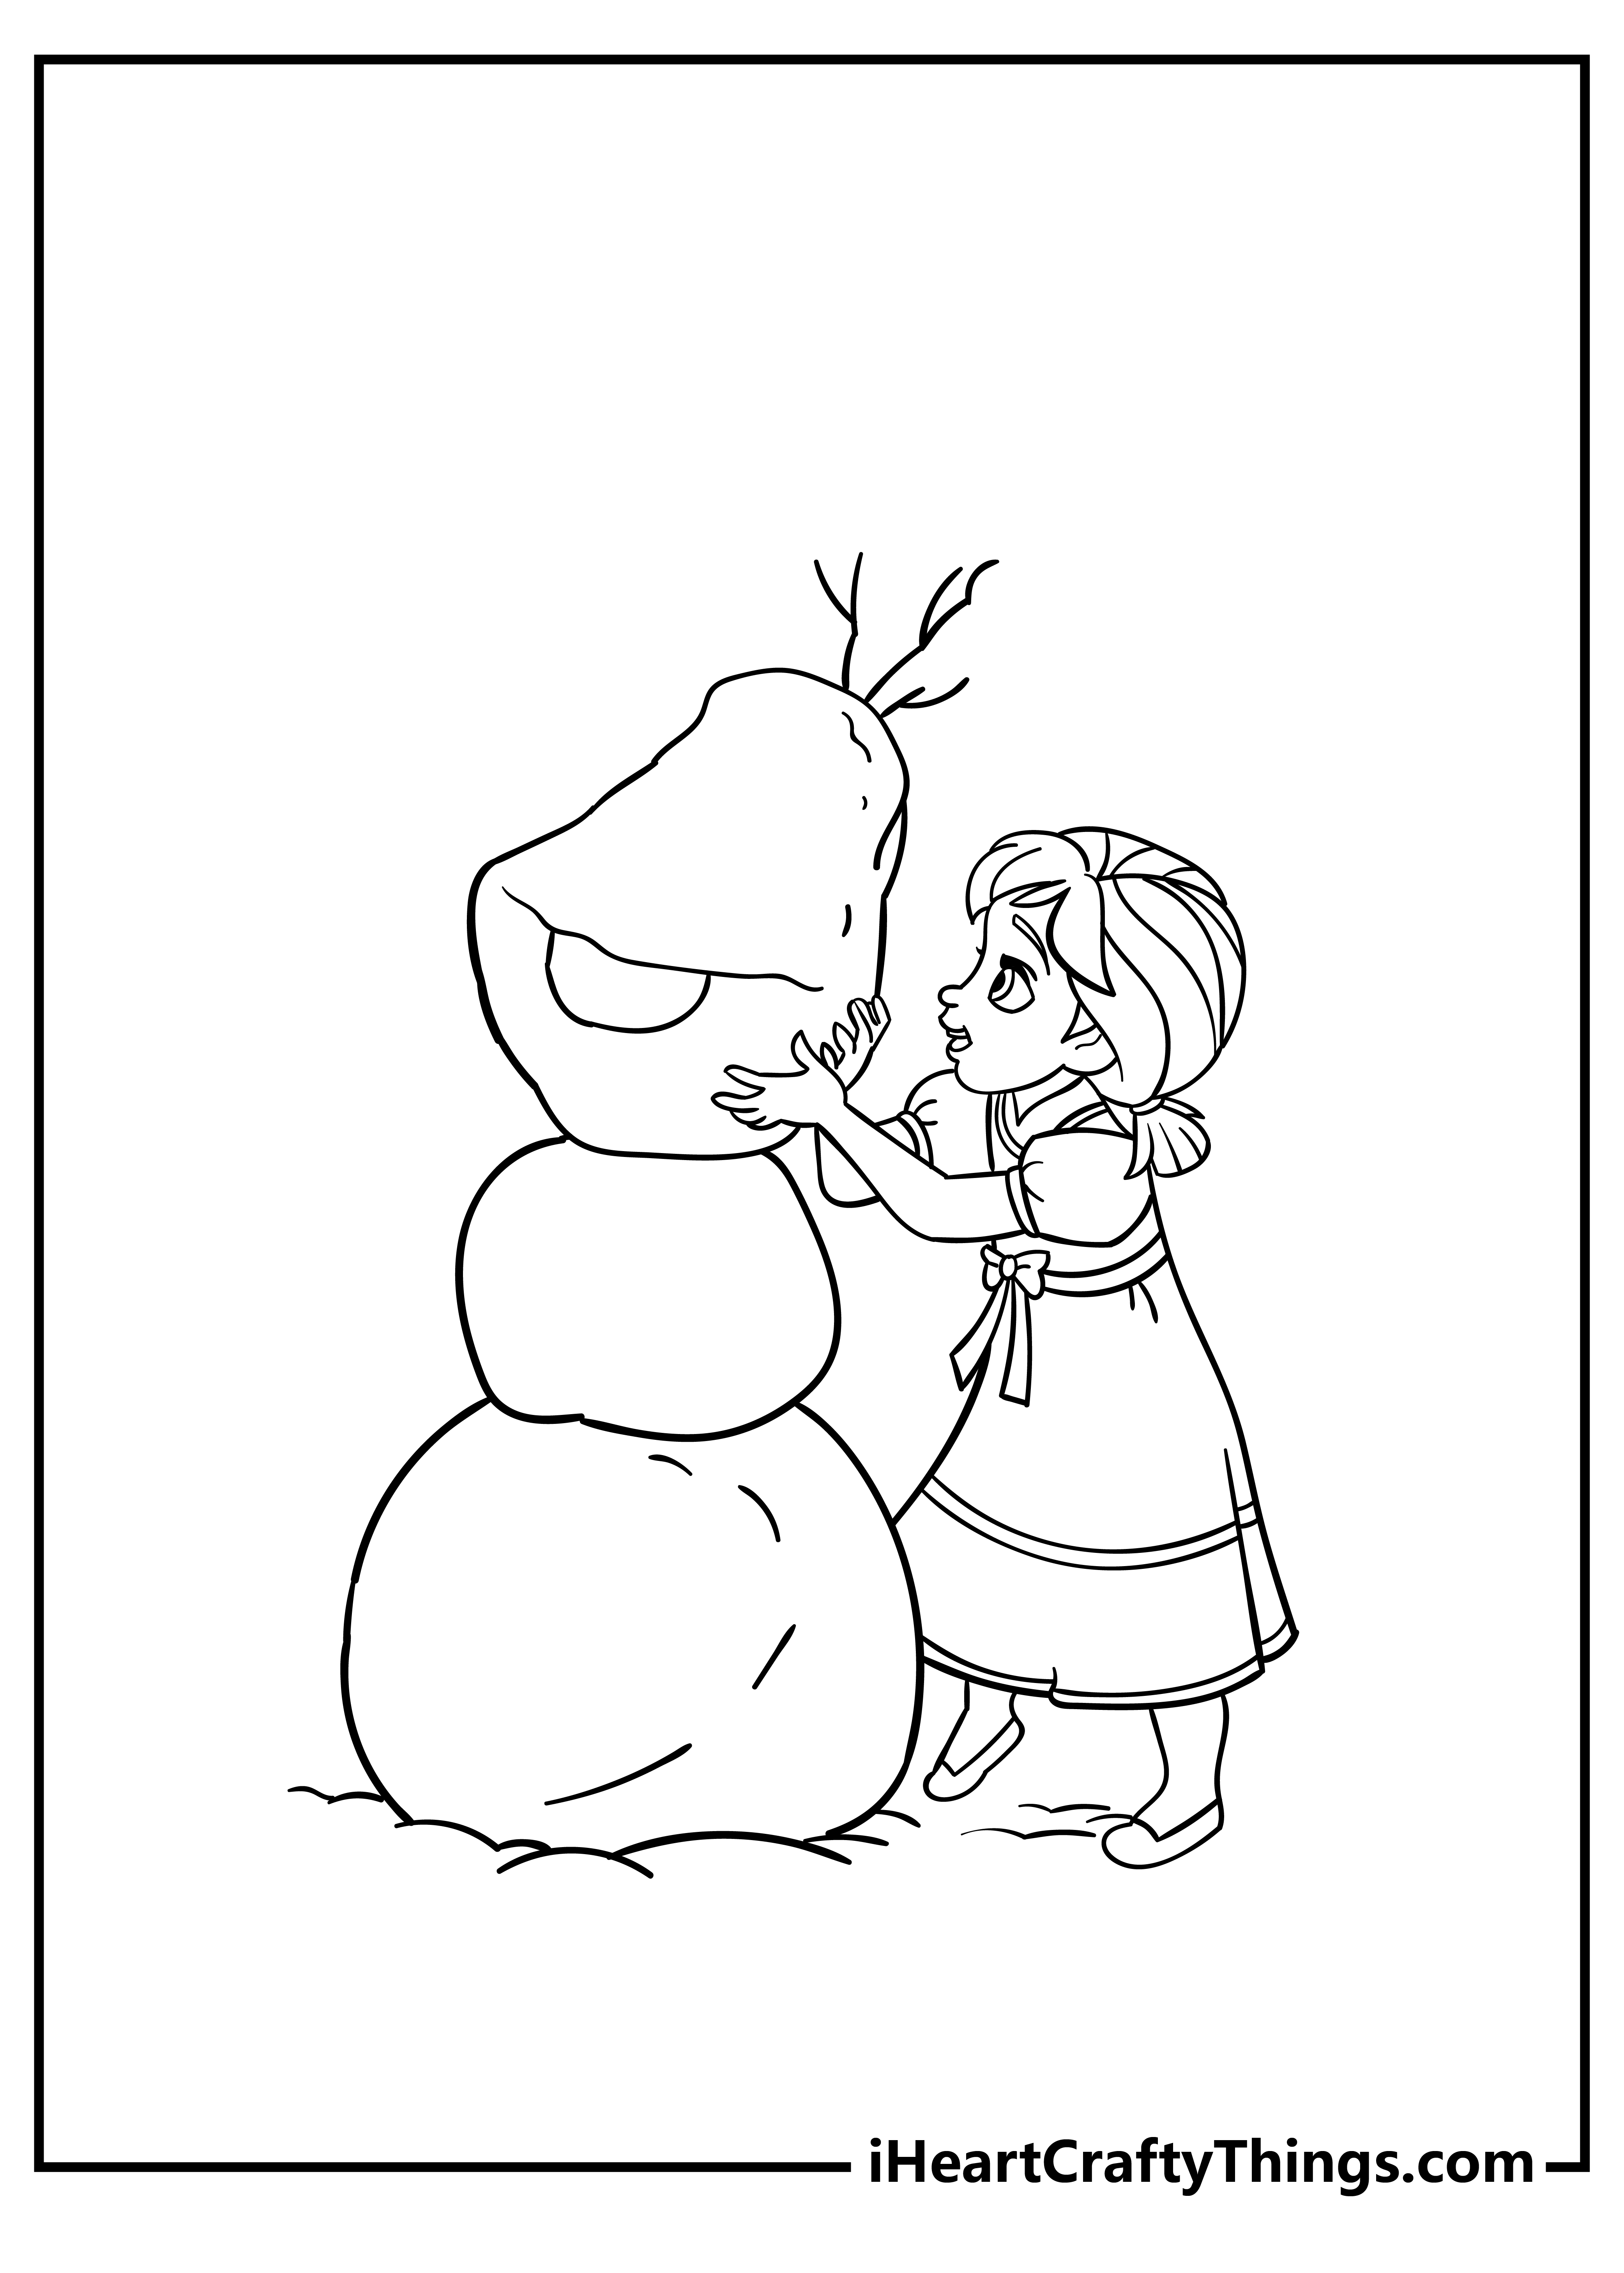 Elsa and Anna Coloring Pages free pdf download